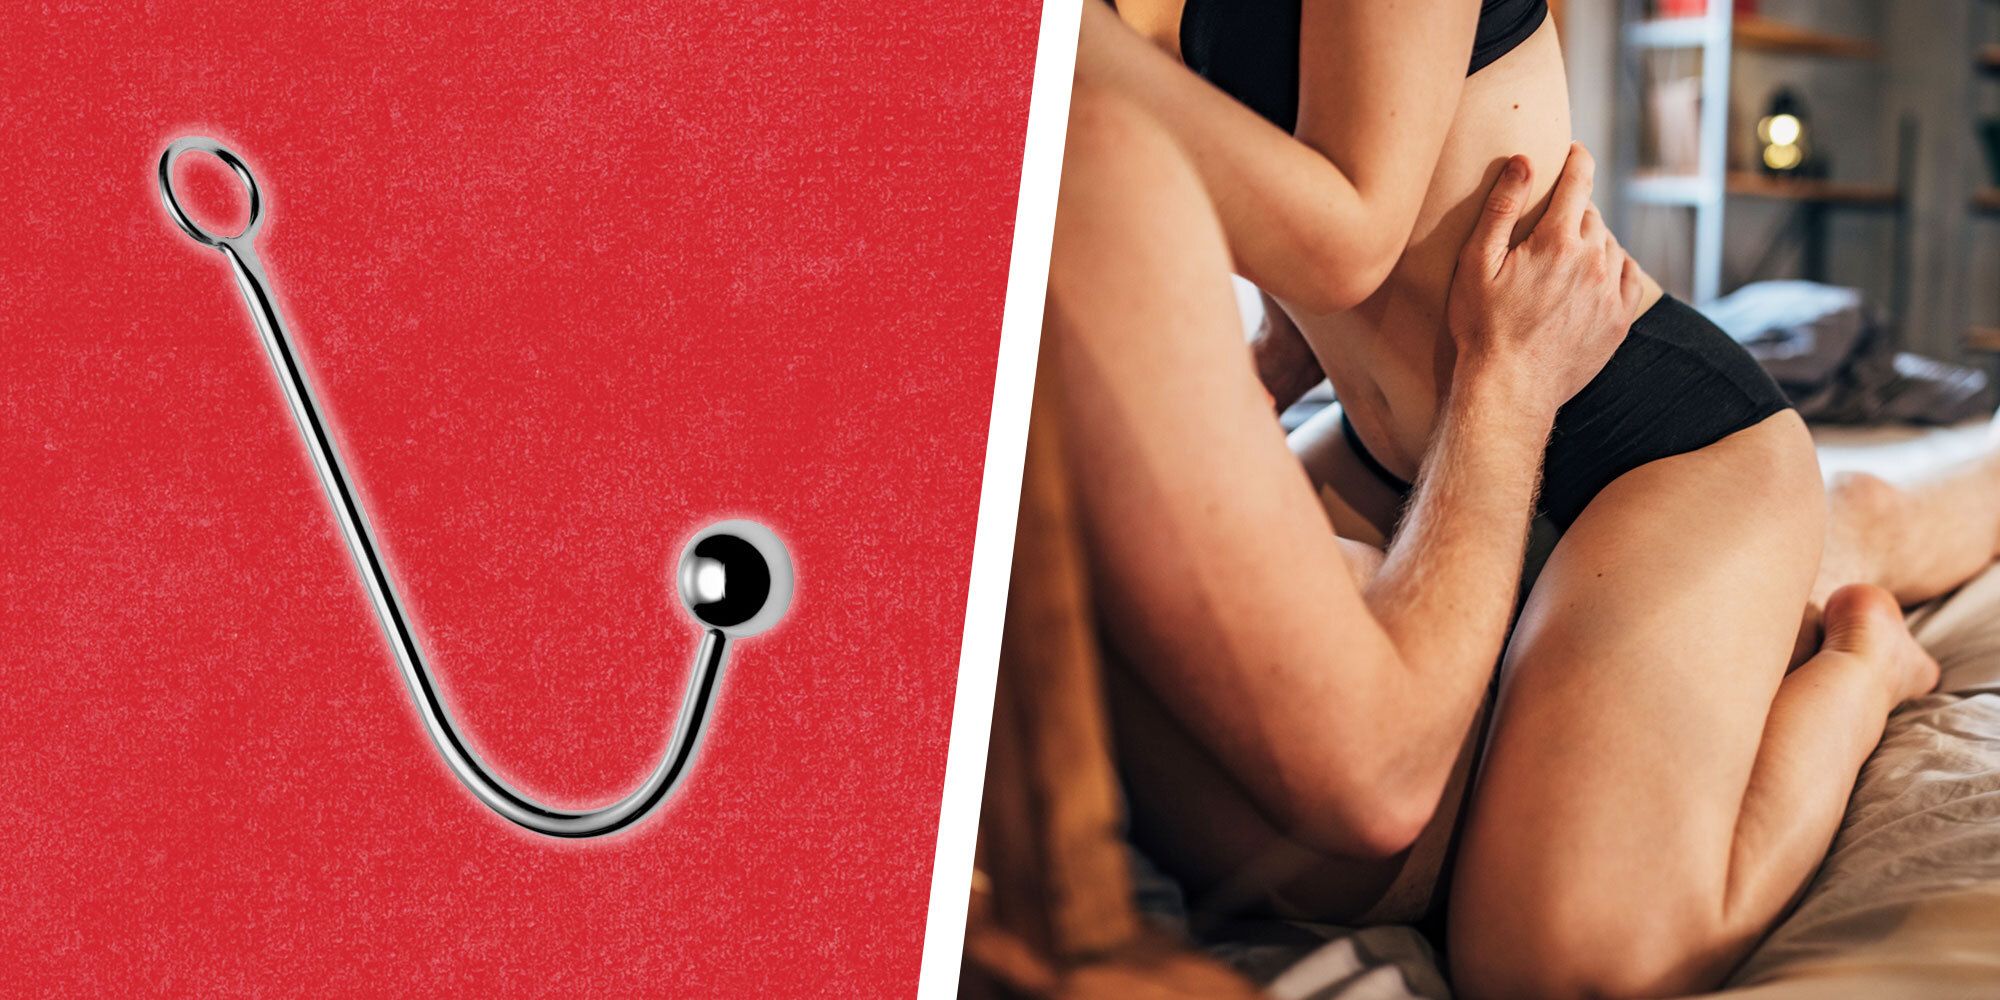 Anal Hooks What They Are and How to Use Them, According to Experts photo